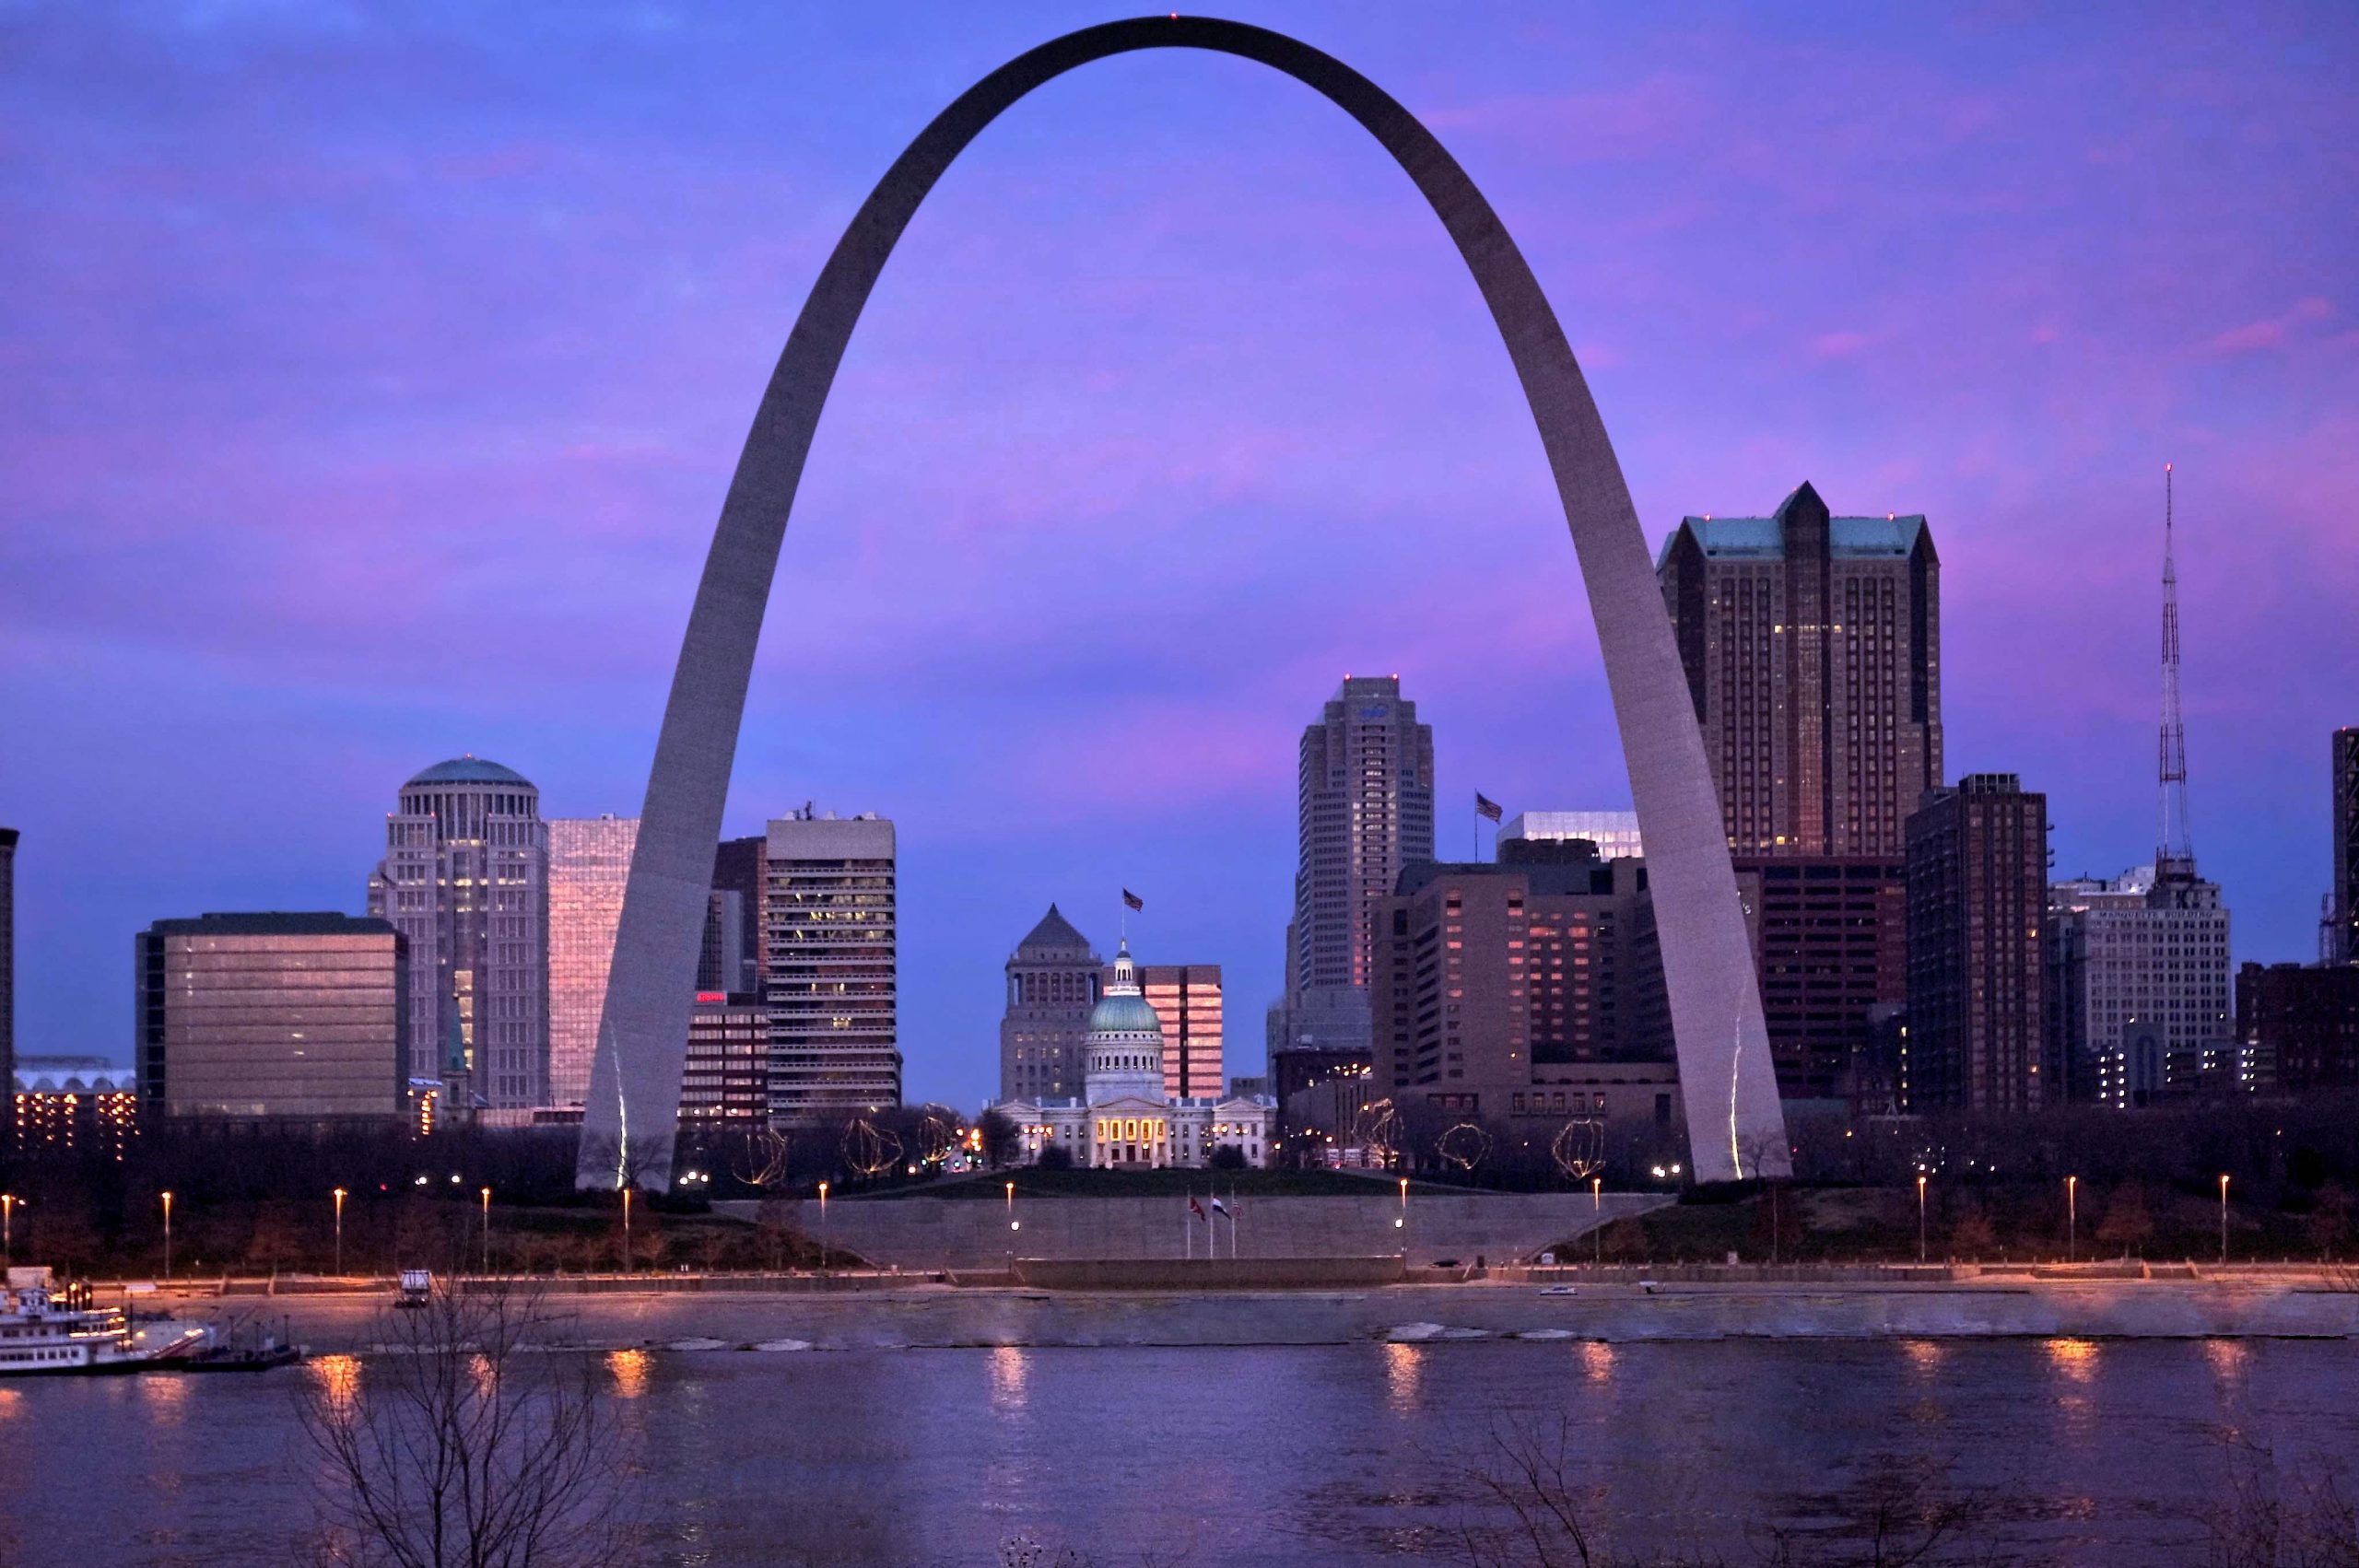 While not directly on Route 66, the Gateway Arch in St. Louis is a must-see attraction for any road trip enthusiast. Take a tram ride to the top for panoramic views of the city and the Mississippi River below.]]>